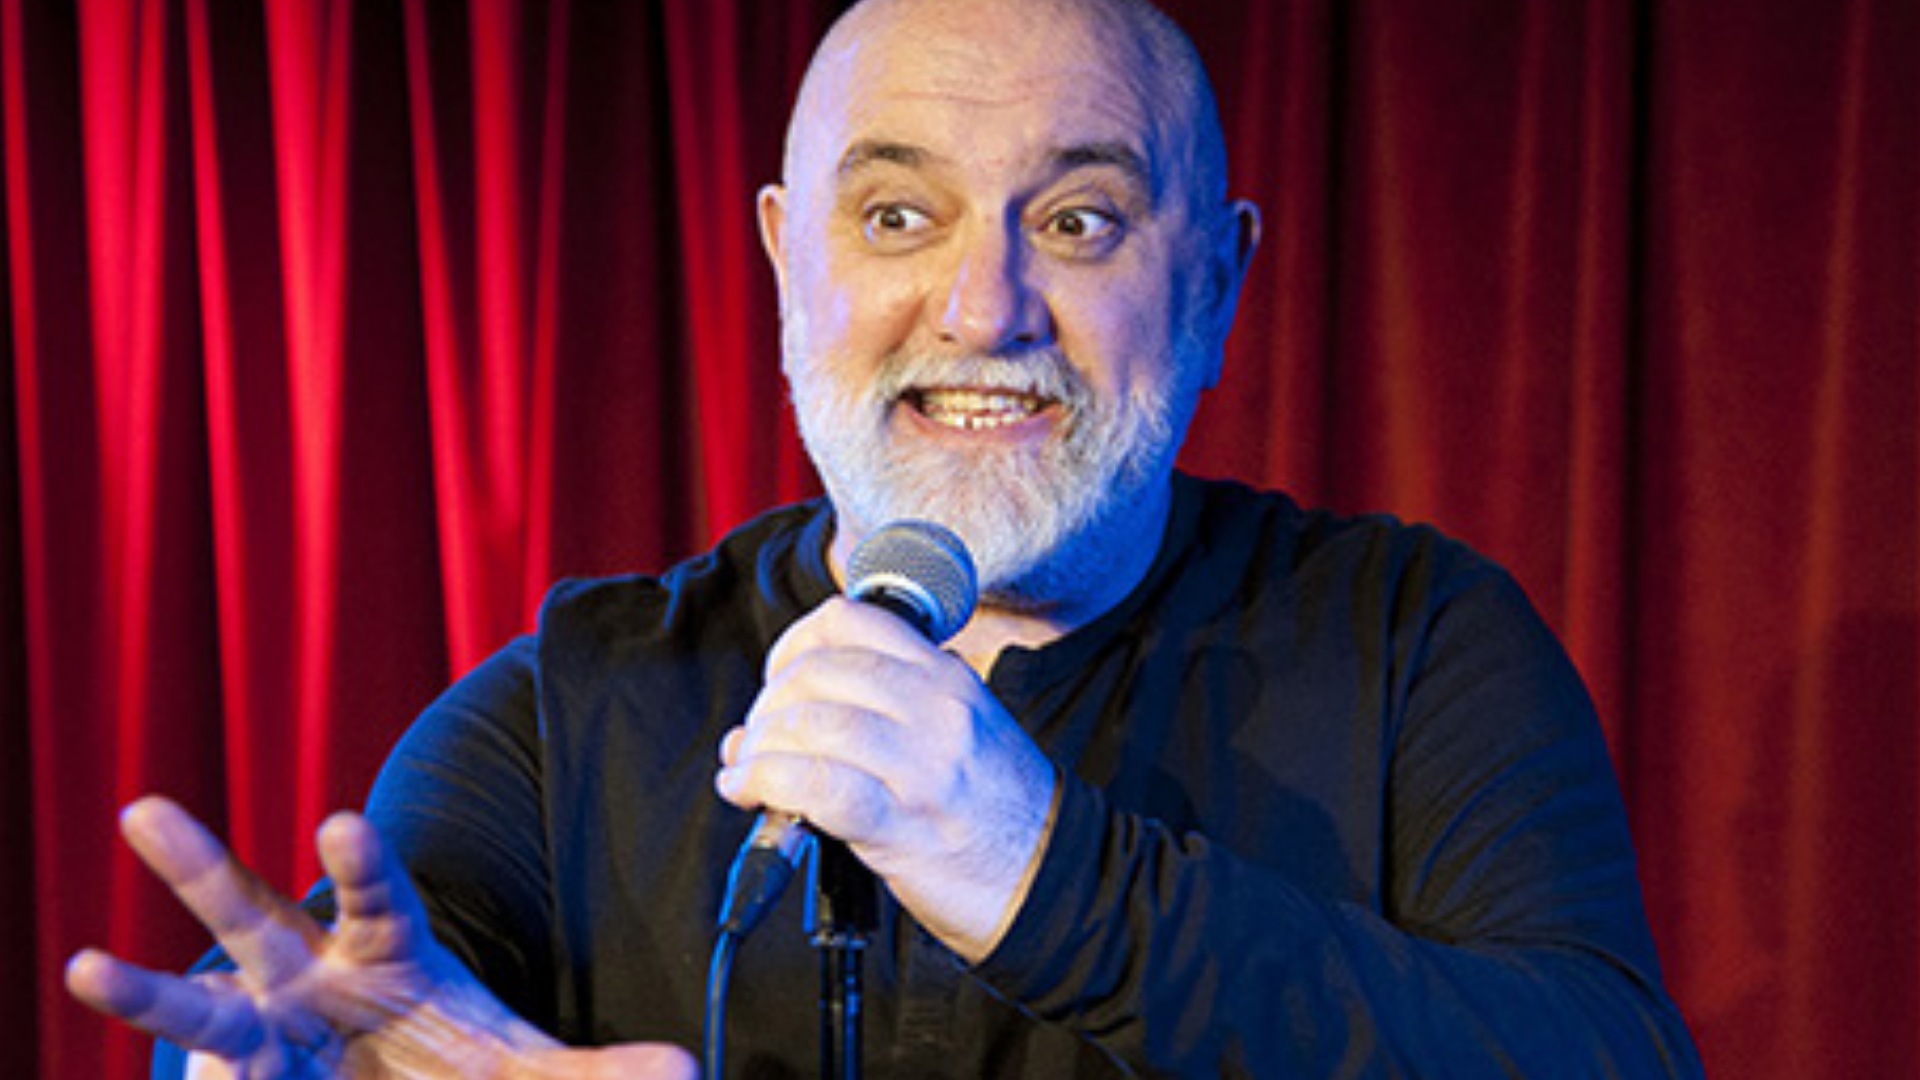 Alexei Sayle at The Soho Theatre. Image credit: Photo by Donald Cooper/Shutterstock